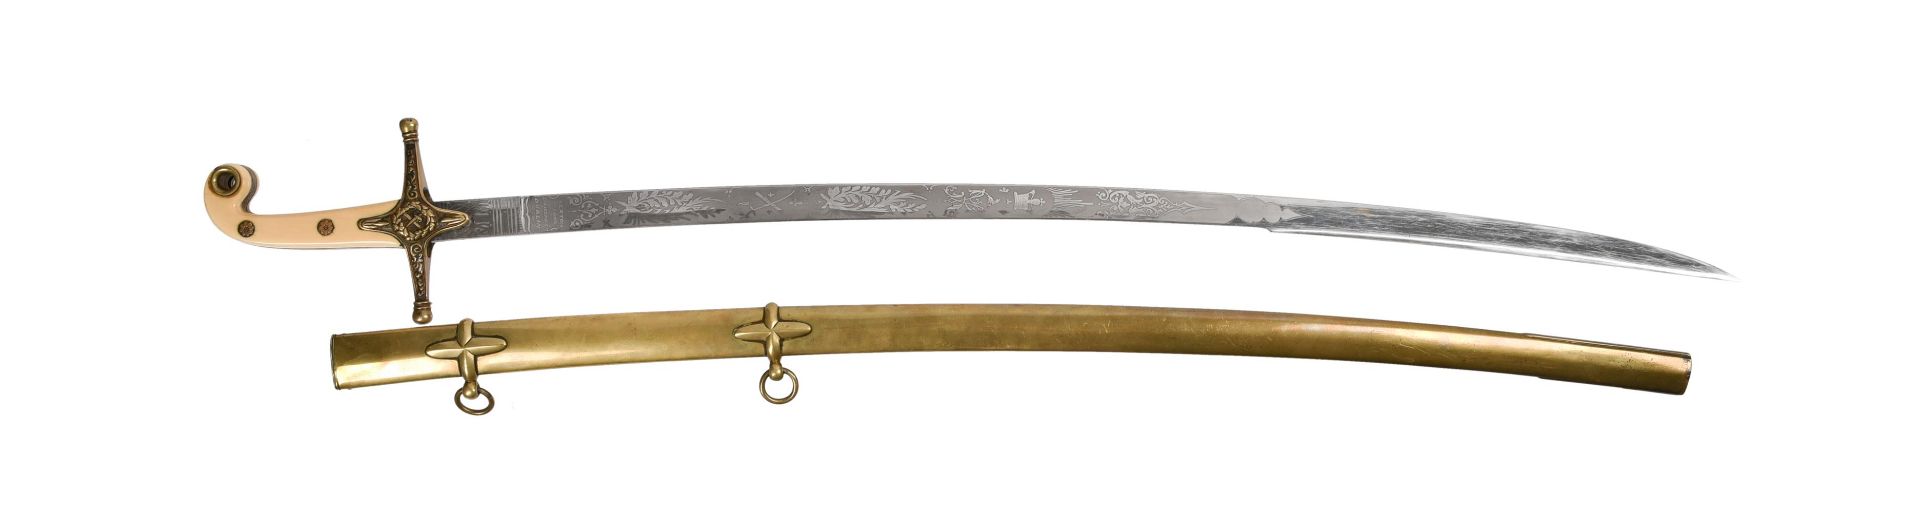 Y A VICTORIAN GENERAL OFFICER'S 1831 PATTERN REGULATION SCIMITAR OR 'MAMELUKE' AND BRASS SCABBARD MI - Image 2 of 6